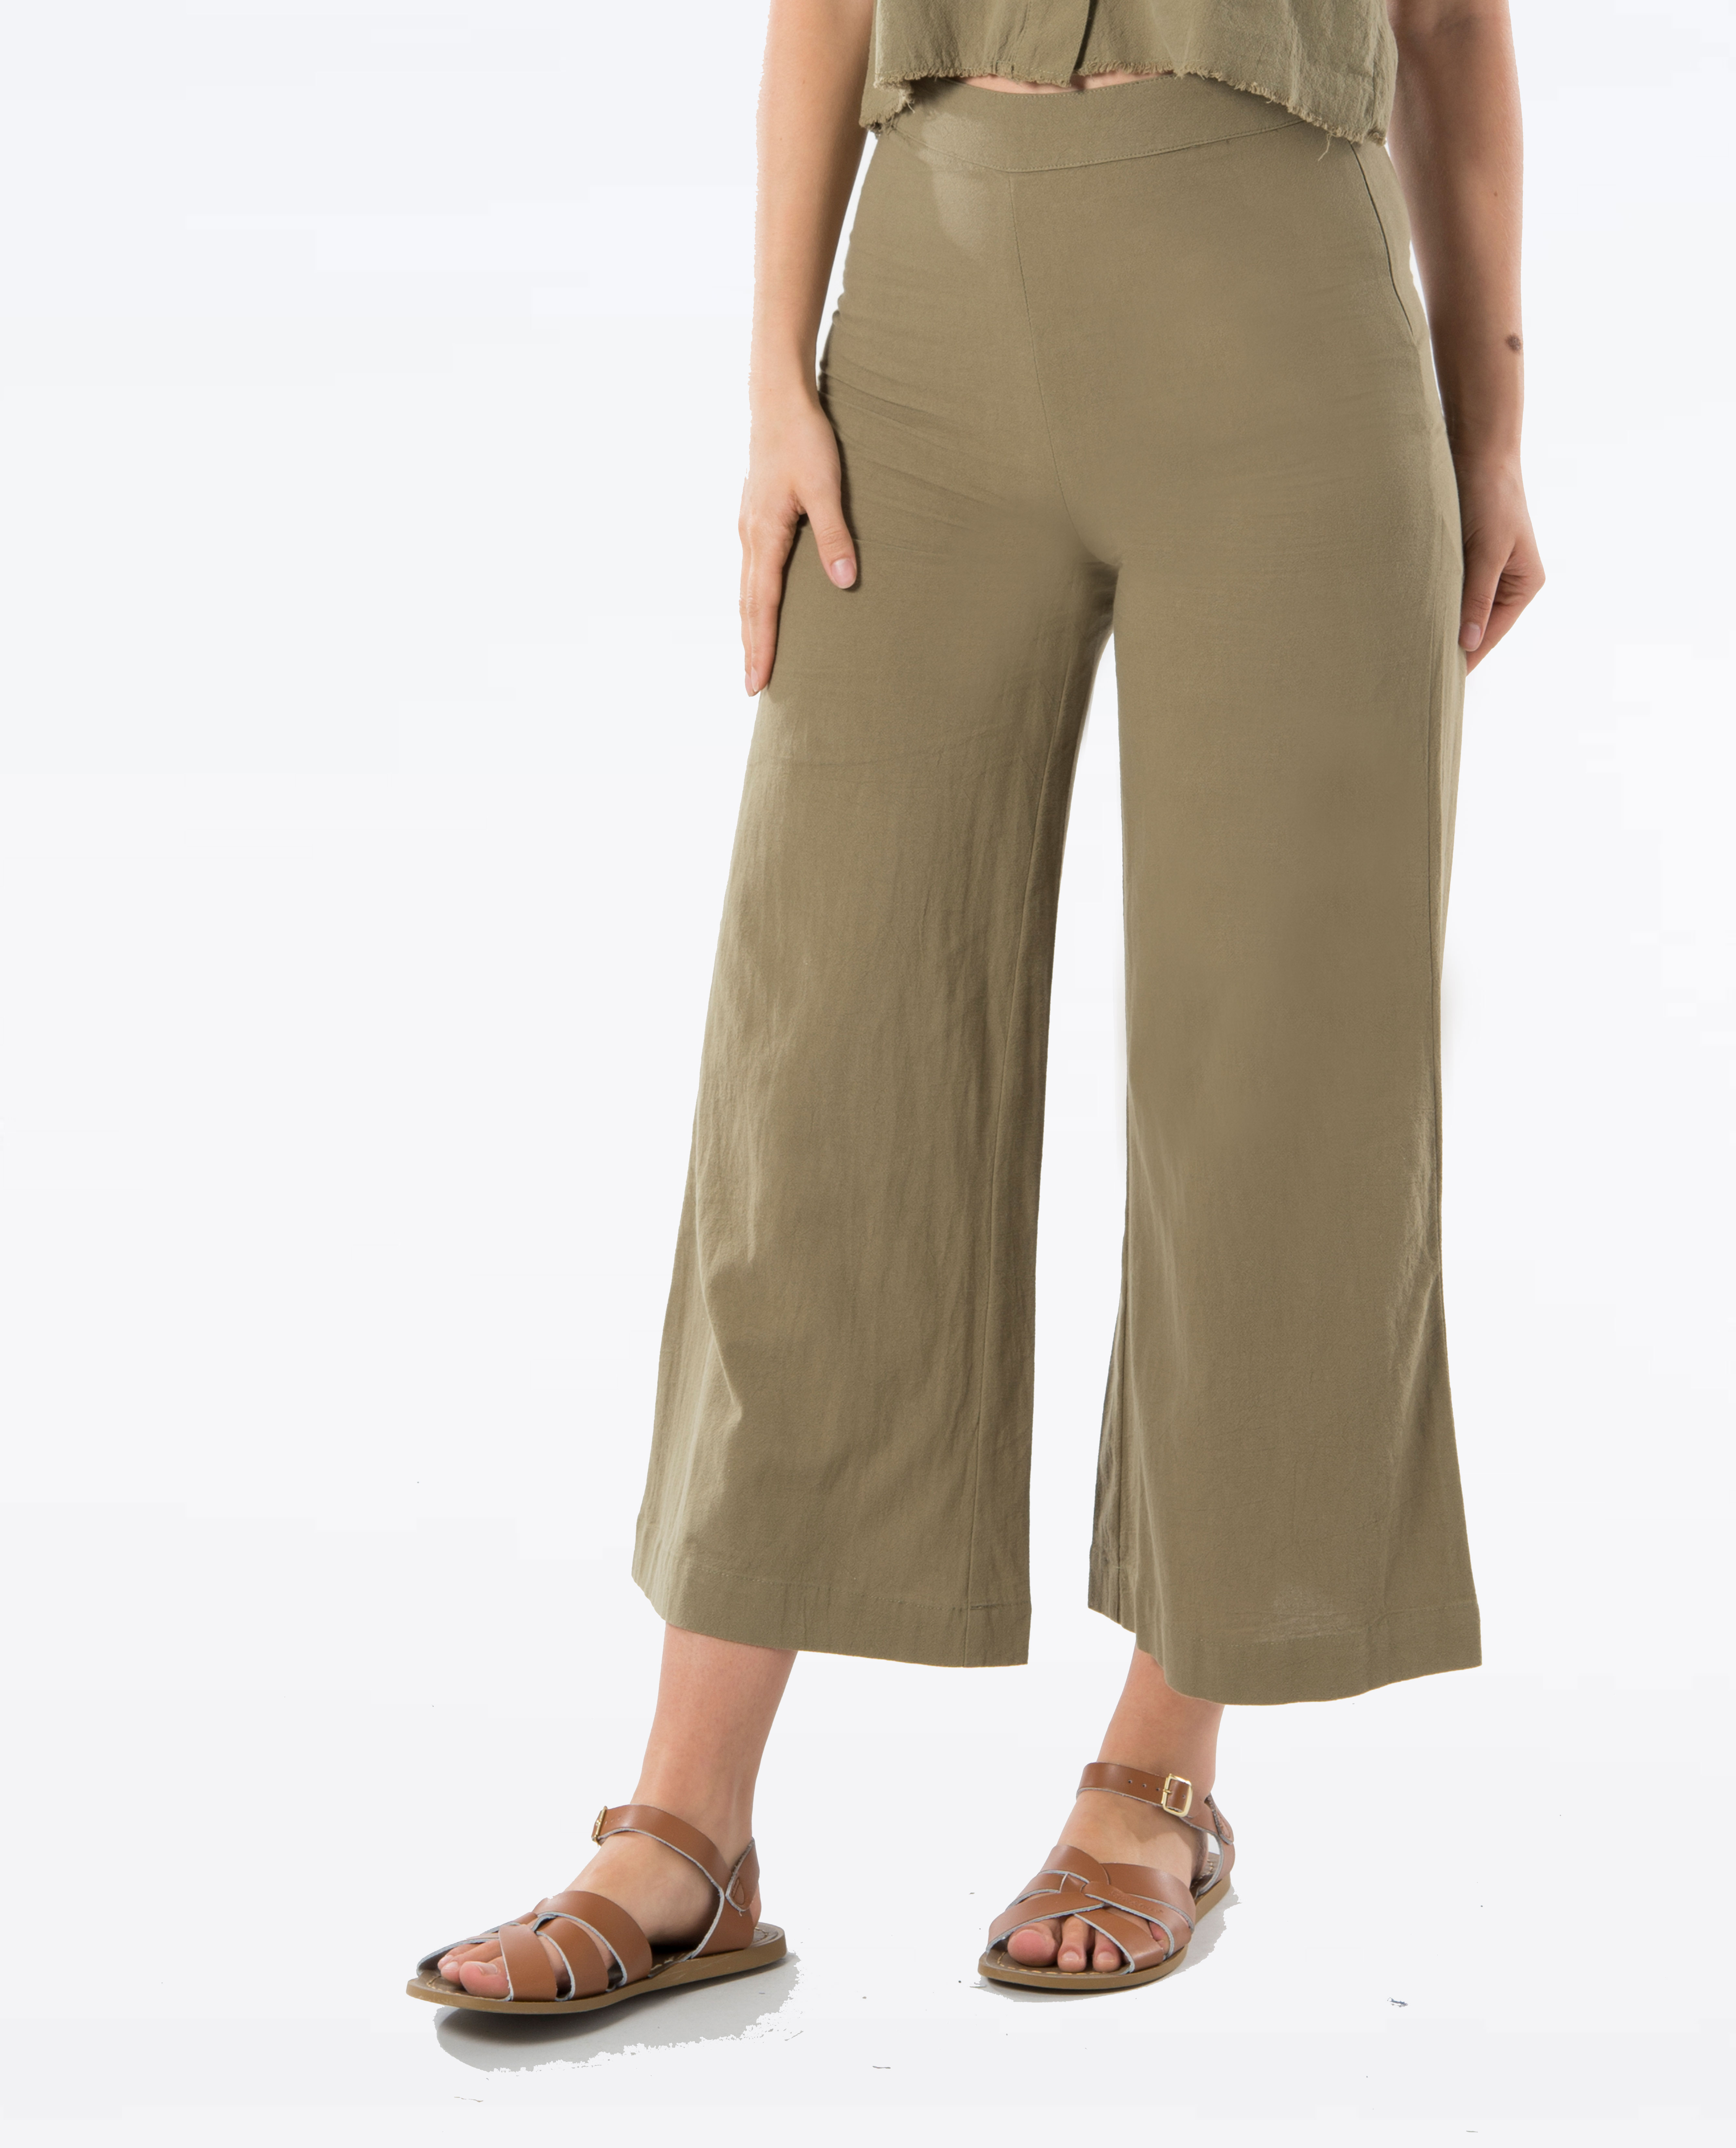 Rusty Just Rouser Flare Crop Pant | Ozmosis | Pants & Jeans